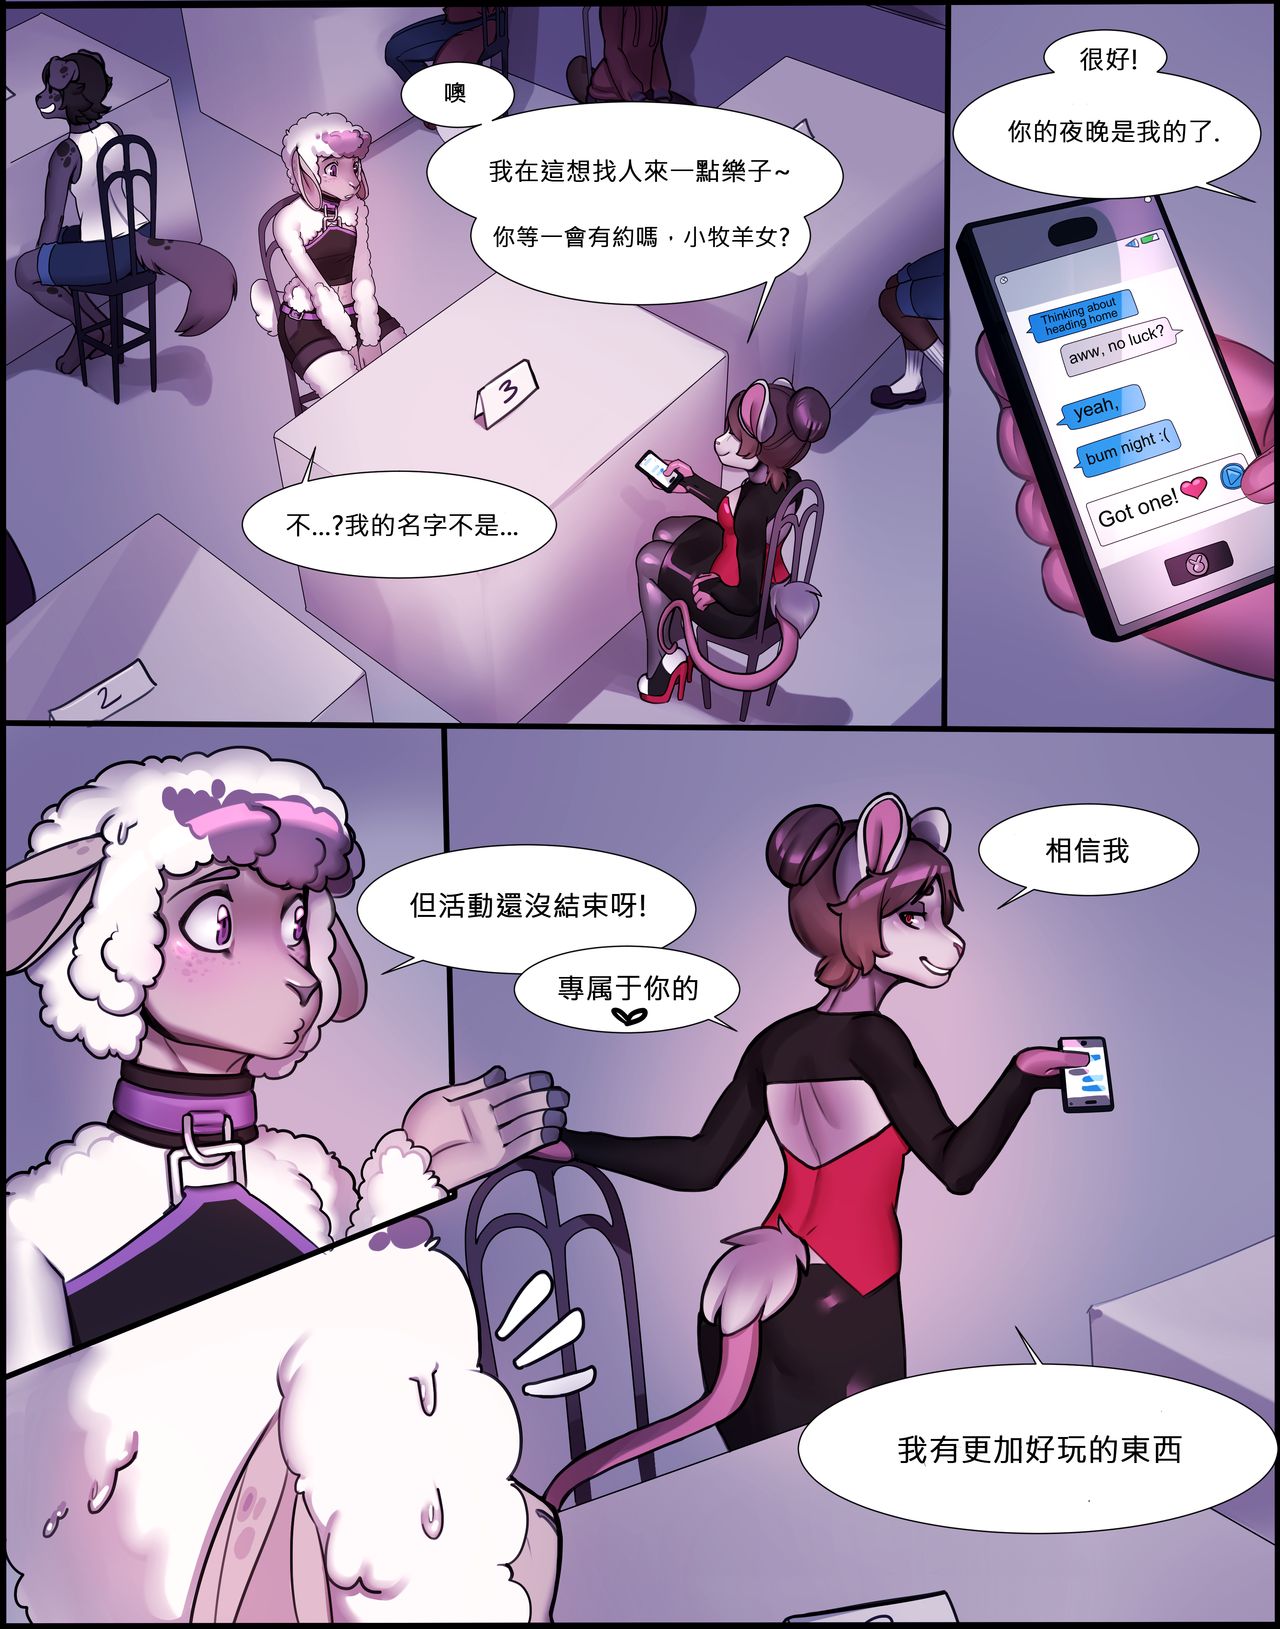 [Arh] HNT Ch. 1 [Ongoing][小賽個人漢化][Chinese] 